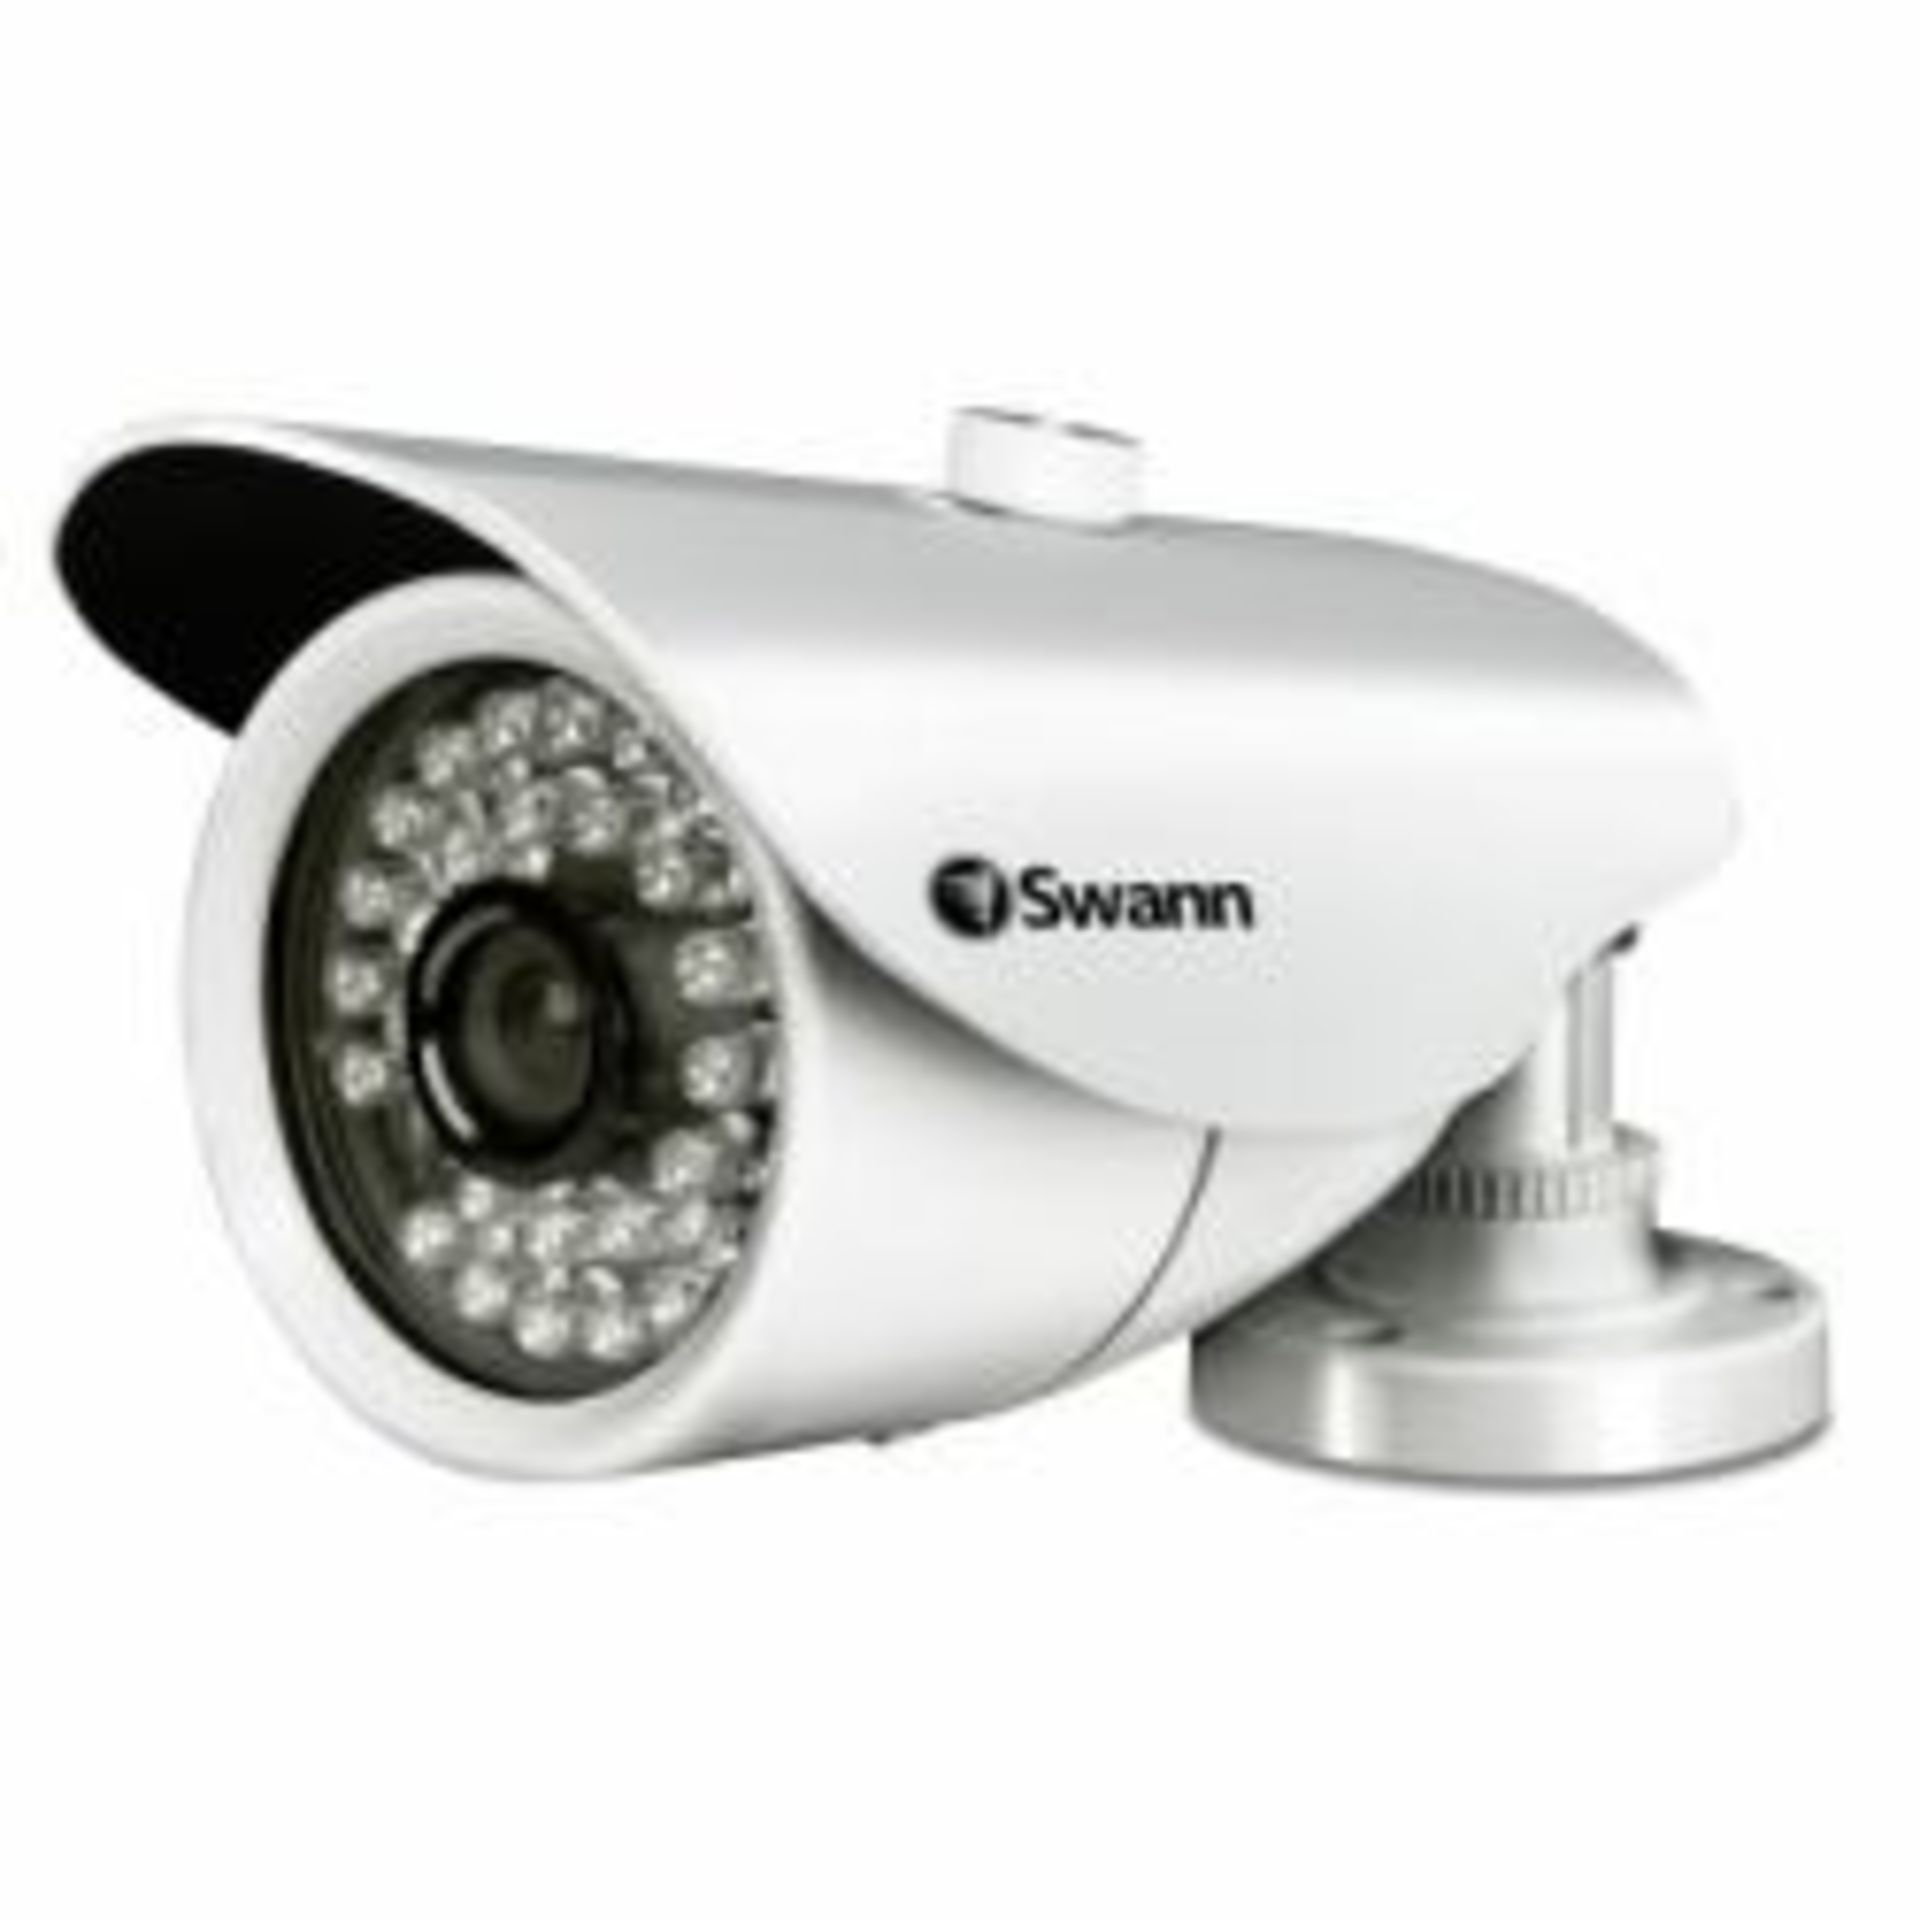 V *TRADE QTY* Brand New Swann PRO-870 Bullet Cam 850 TVL - Powerful Night Vision Up To 35m/114ft X 3